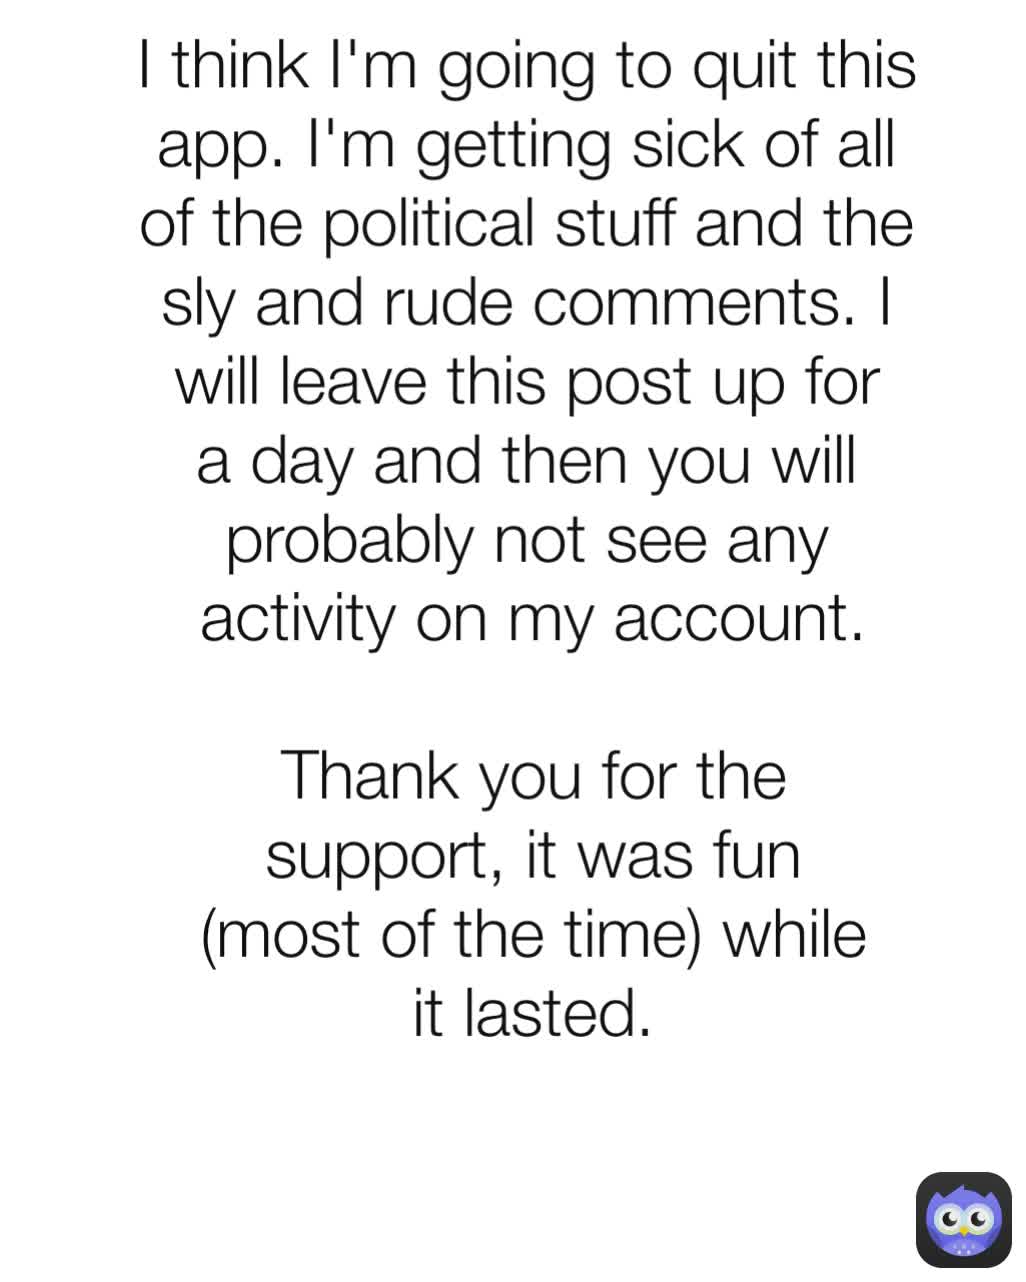 activity on my account.

Thank you for the support, it was fun (most of the time) while it lasted. I think I'm going to quit this app. I'm getting sick of all of the political stuff and the sly and rude comments. I will leave this post up for a day and then you will probably not see any